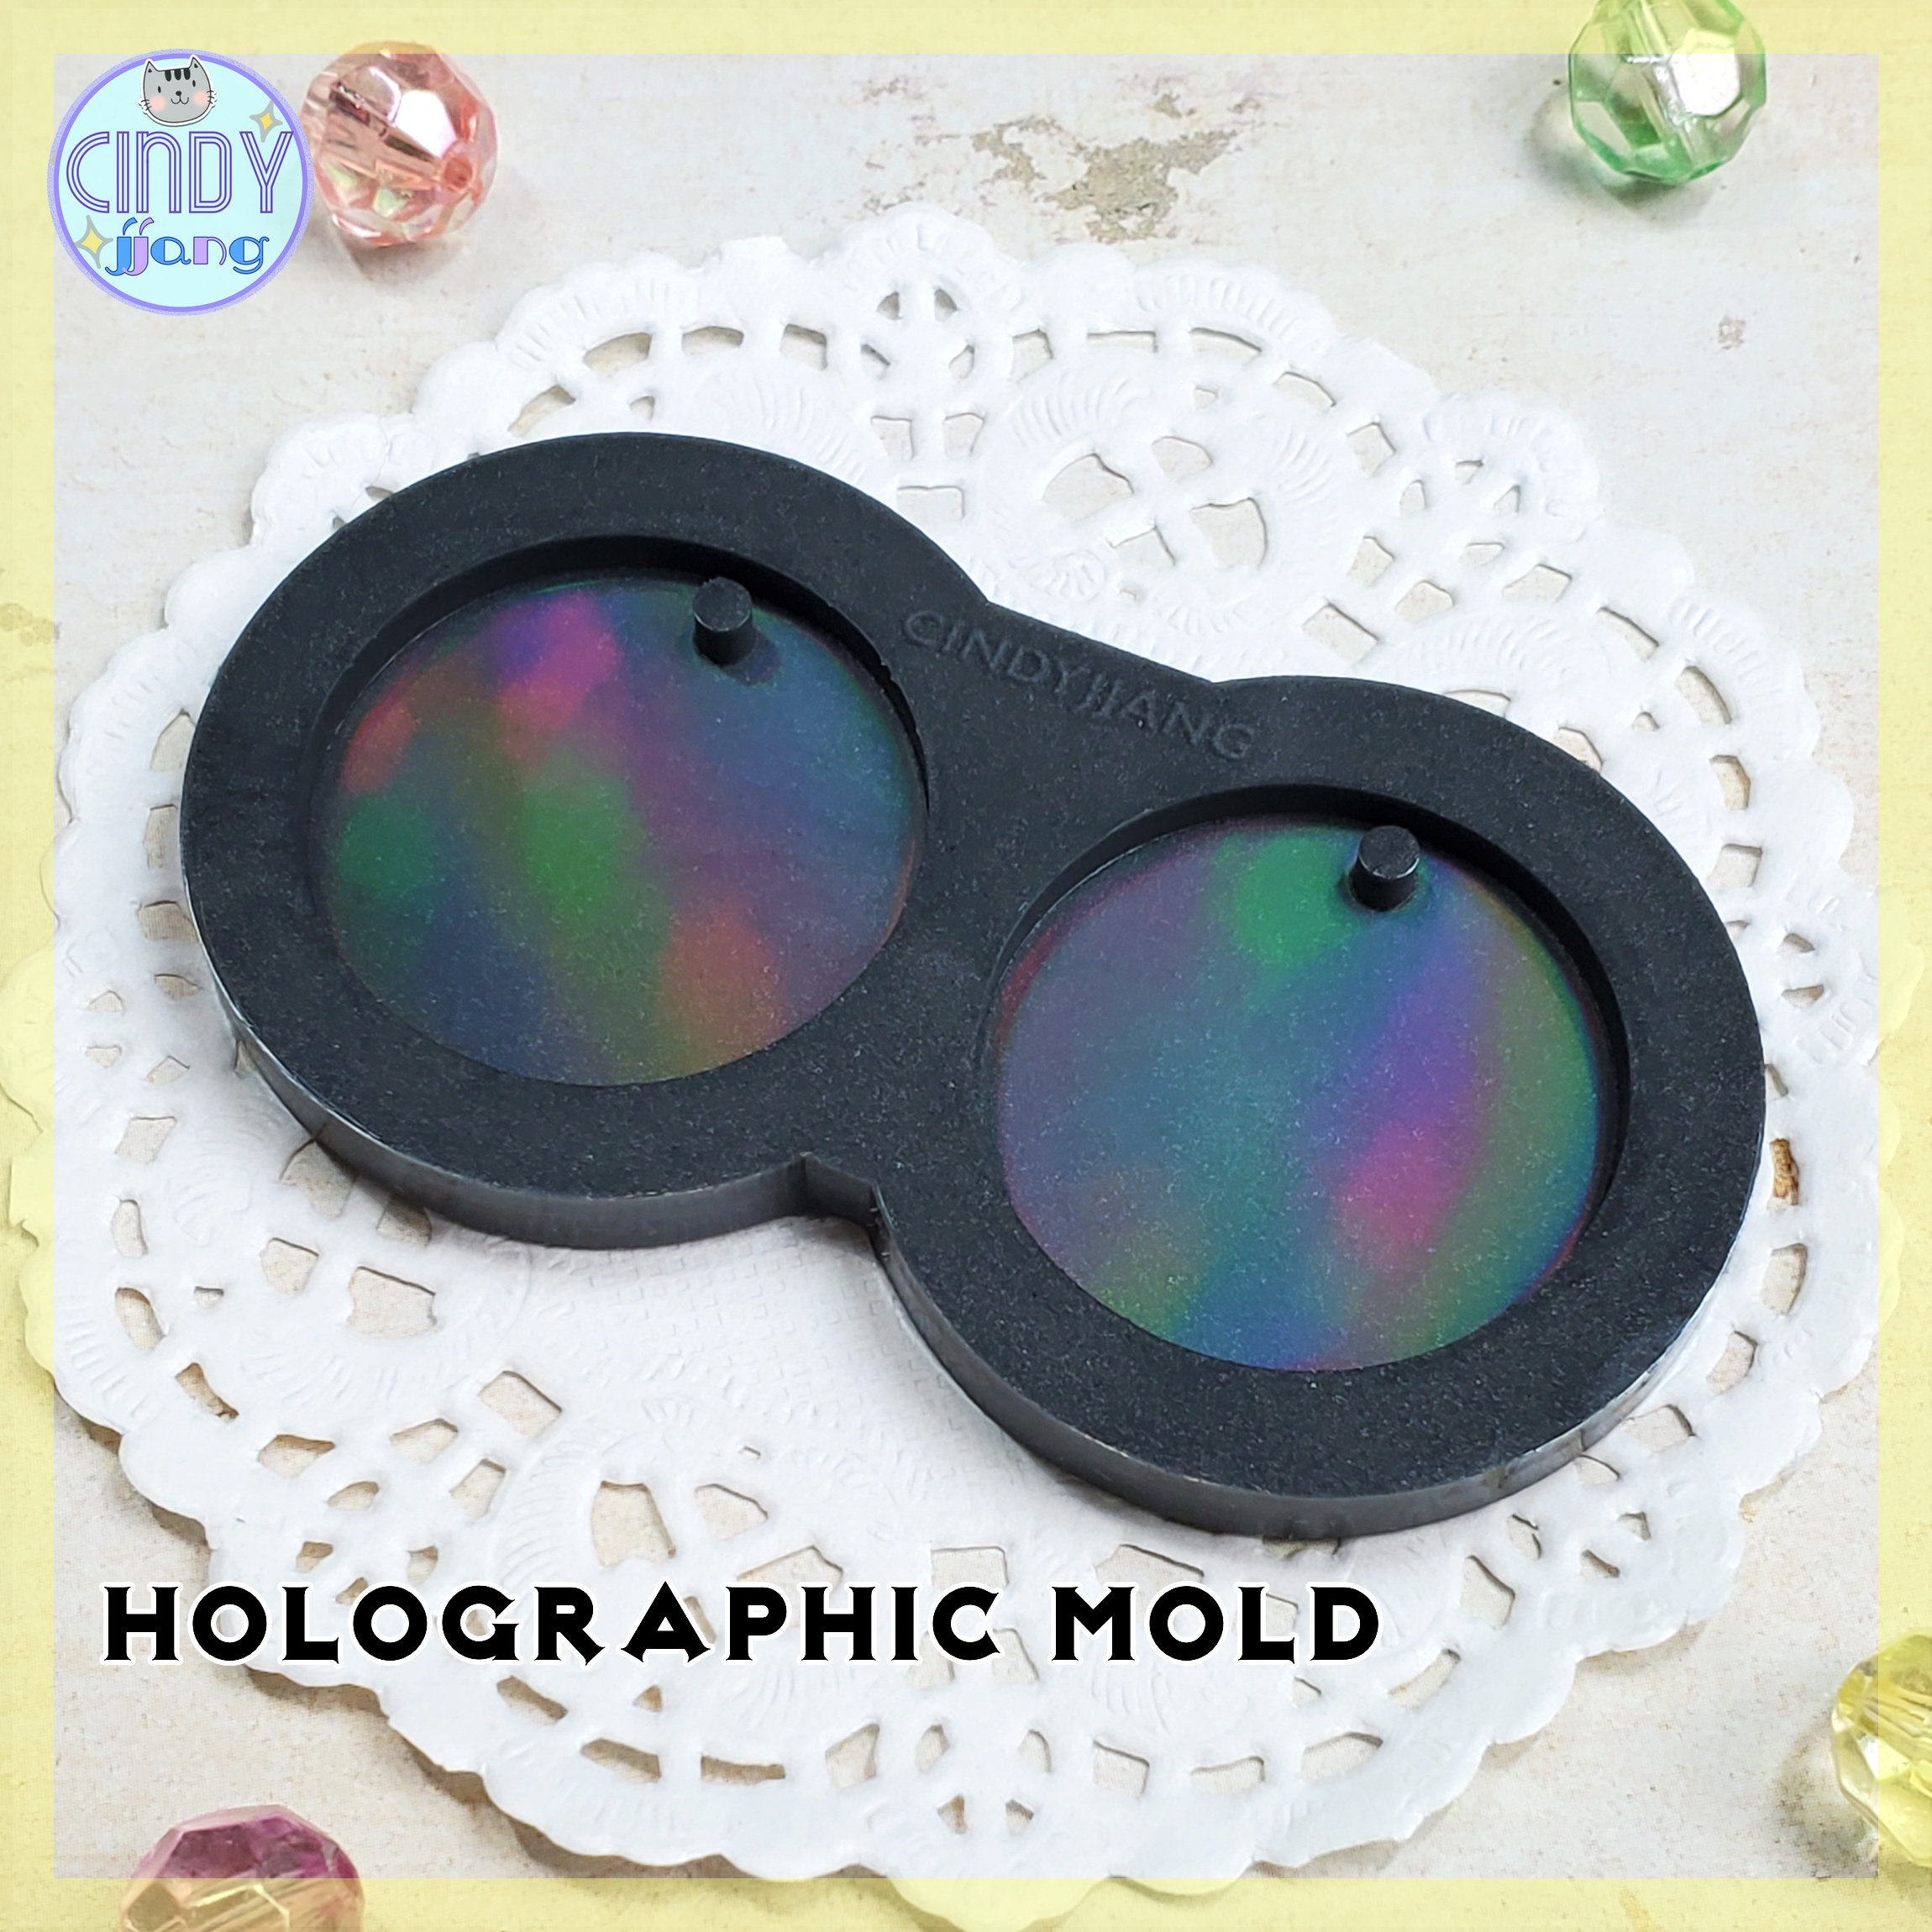 TINYSOME Holographic Phone Grip Resin Mold Round Silicone Badge Reel Mold  Jewelry Casting Mold for DIY Resin Keychain Pendant 